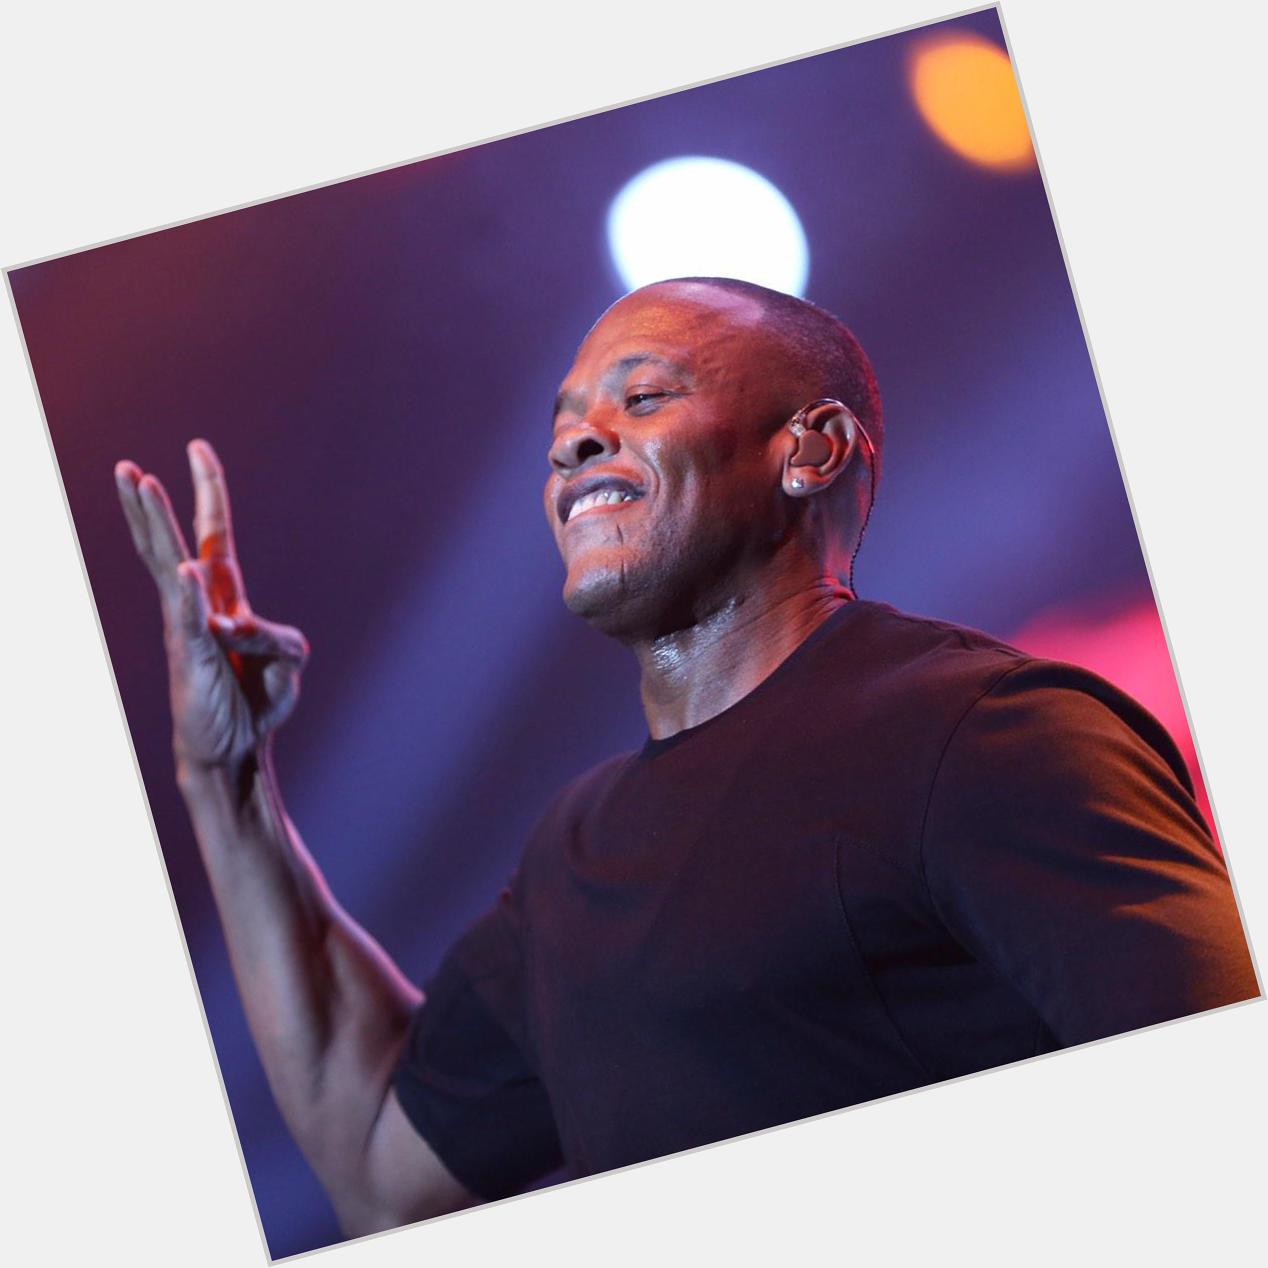 Its Happy 50th Birthday to Dr. Dre! is doing a RIGHT NOW inside the 